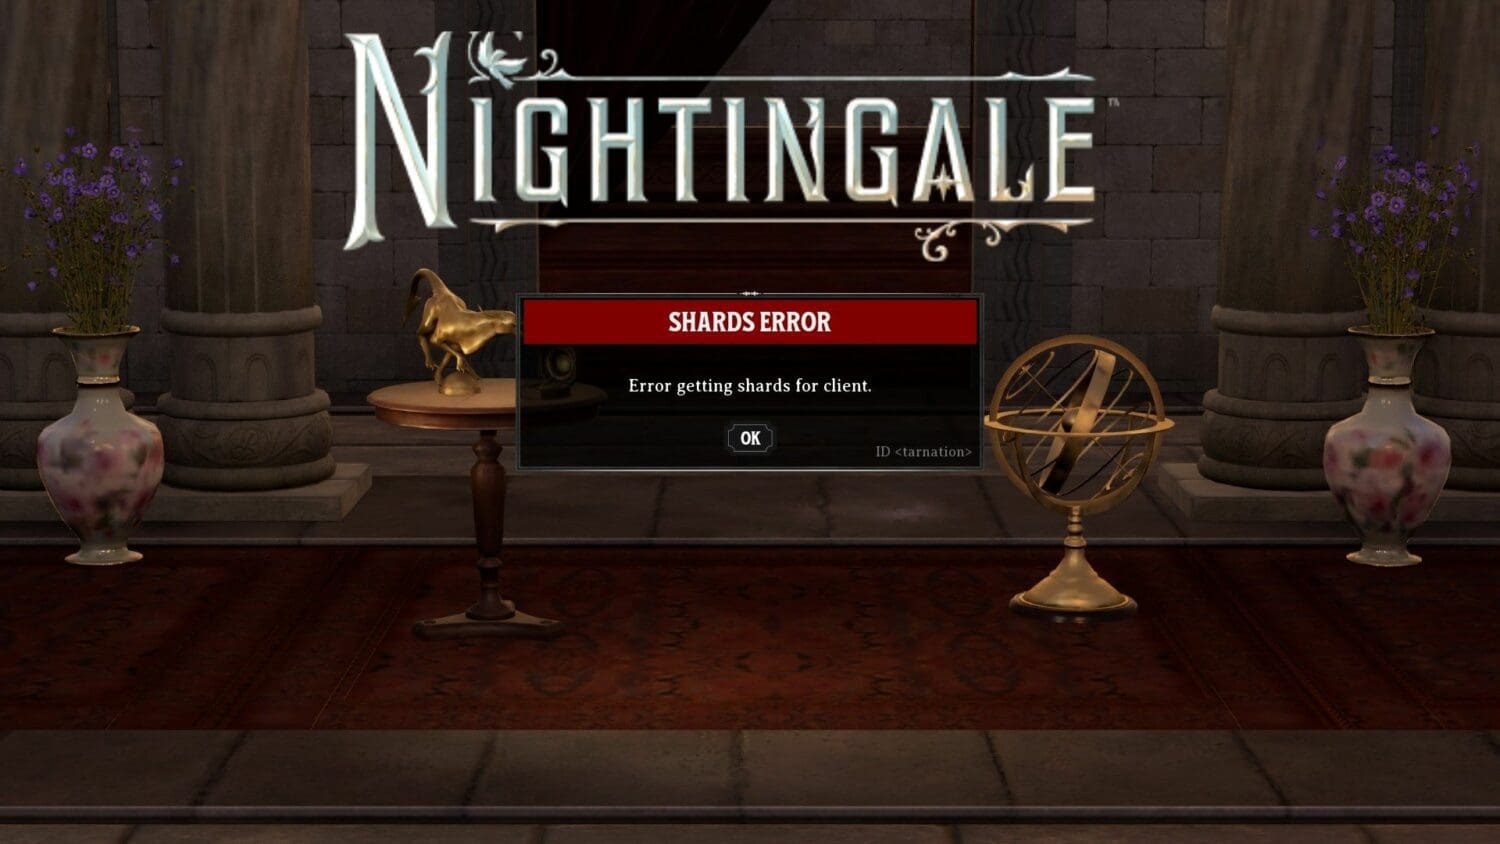 How To Solve Error Getting Shards For Client Nightingale